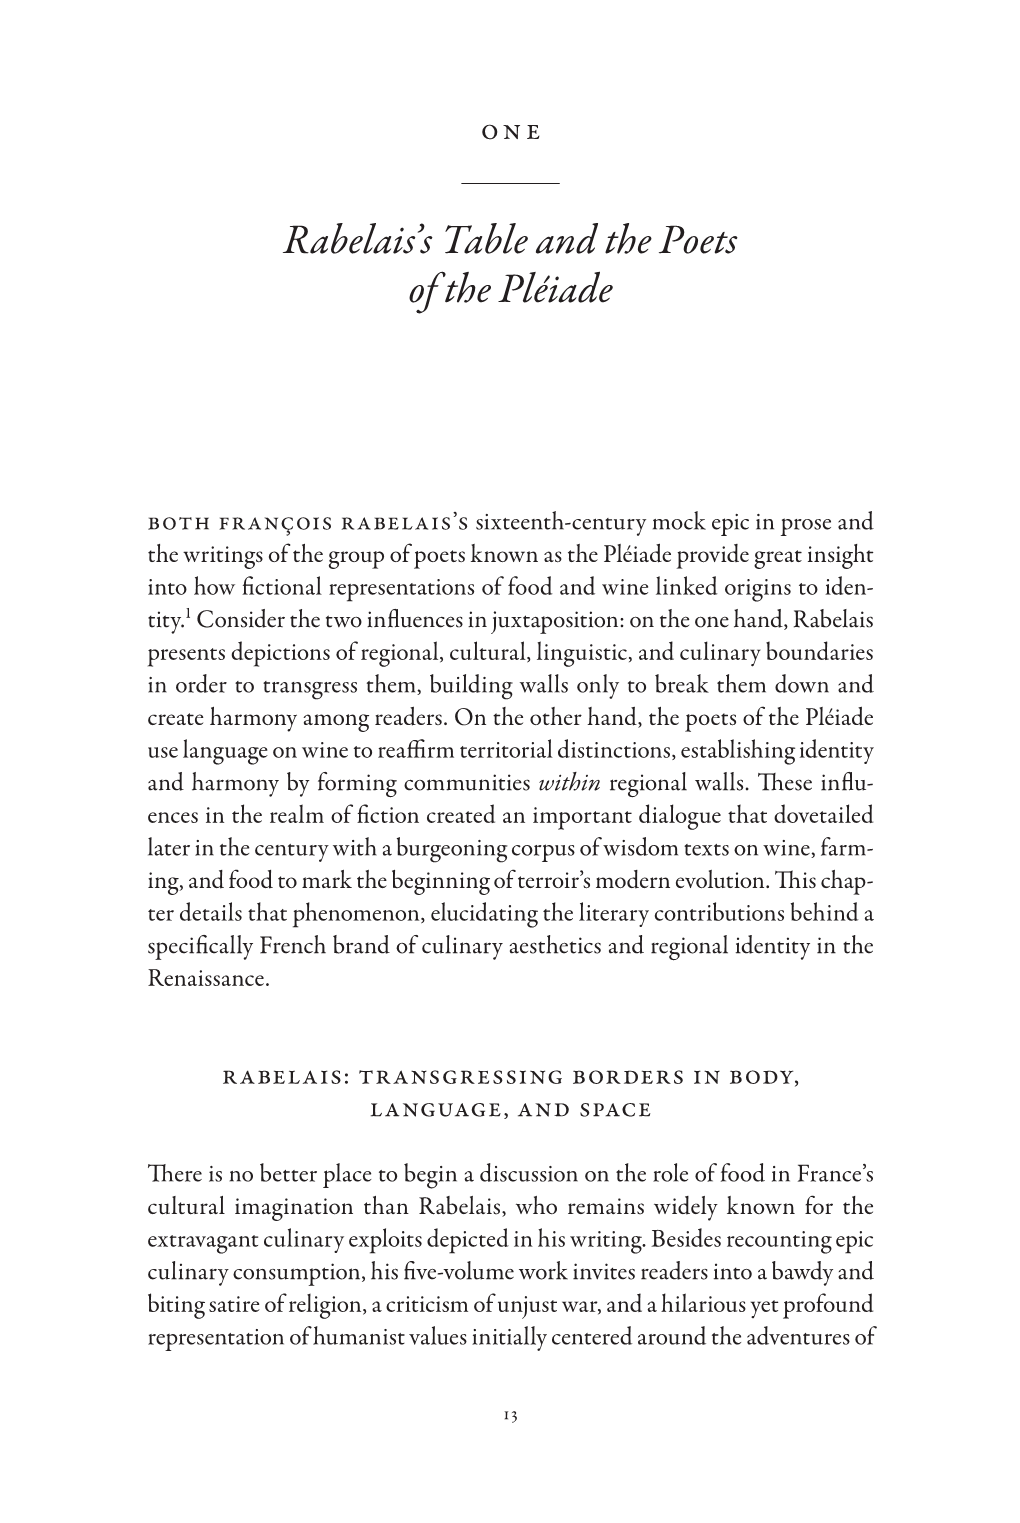 Rabelais's Table and the Poets of the Pléiade